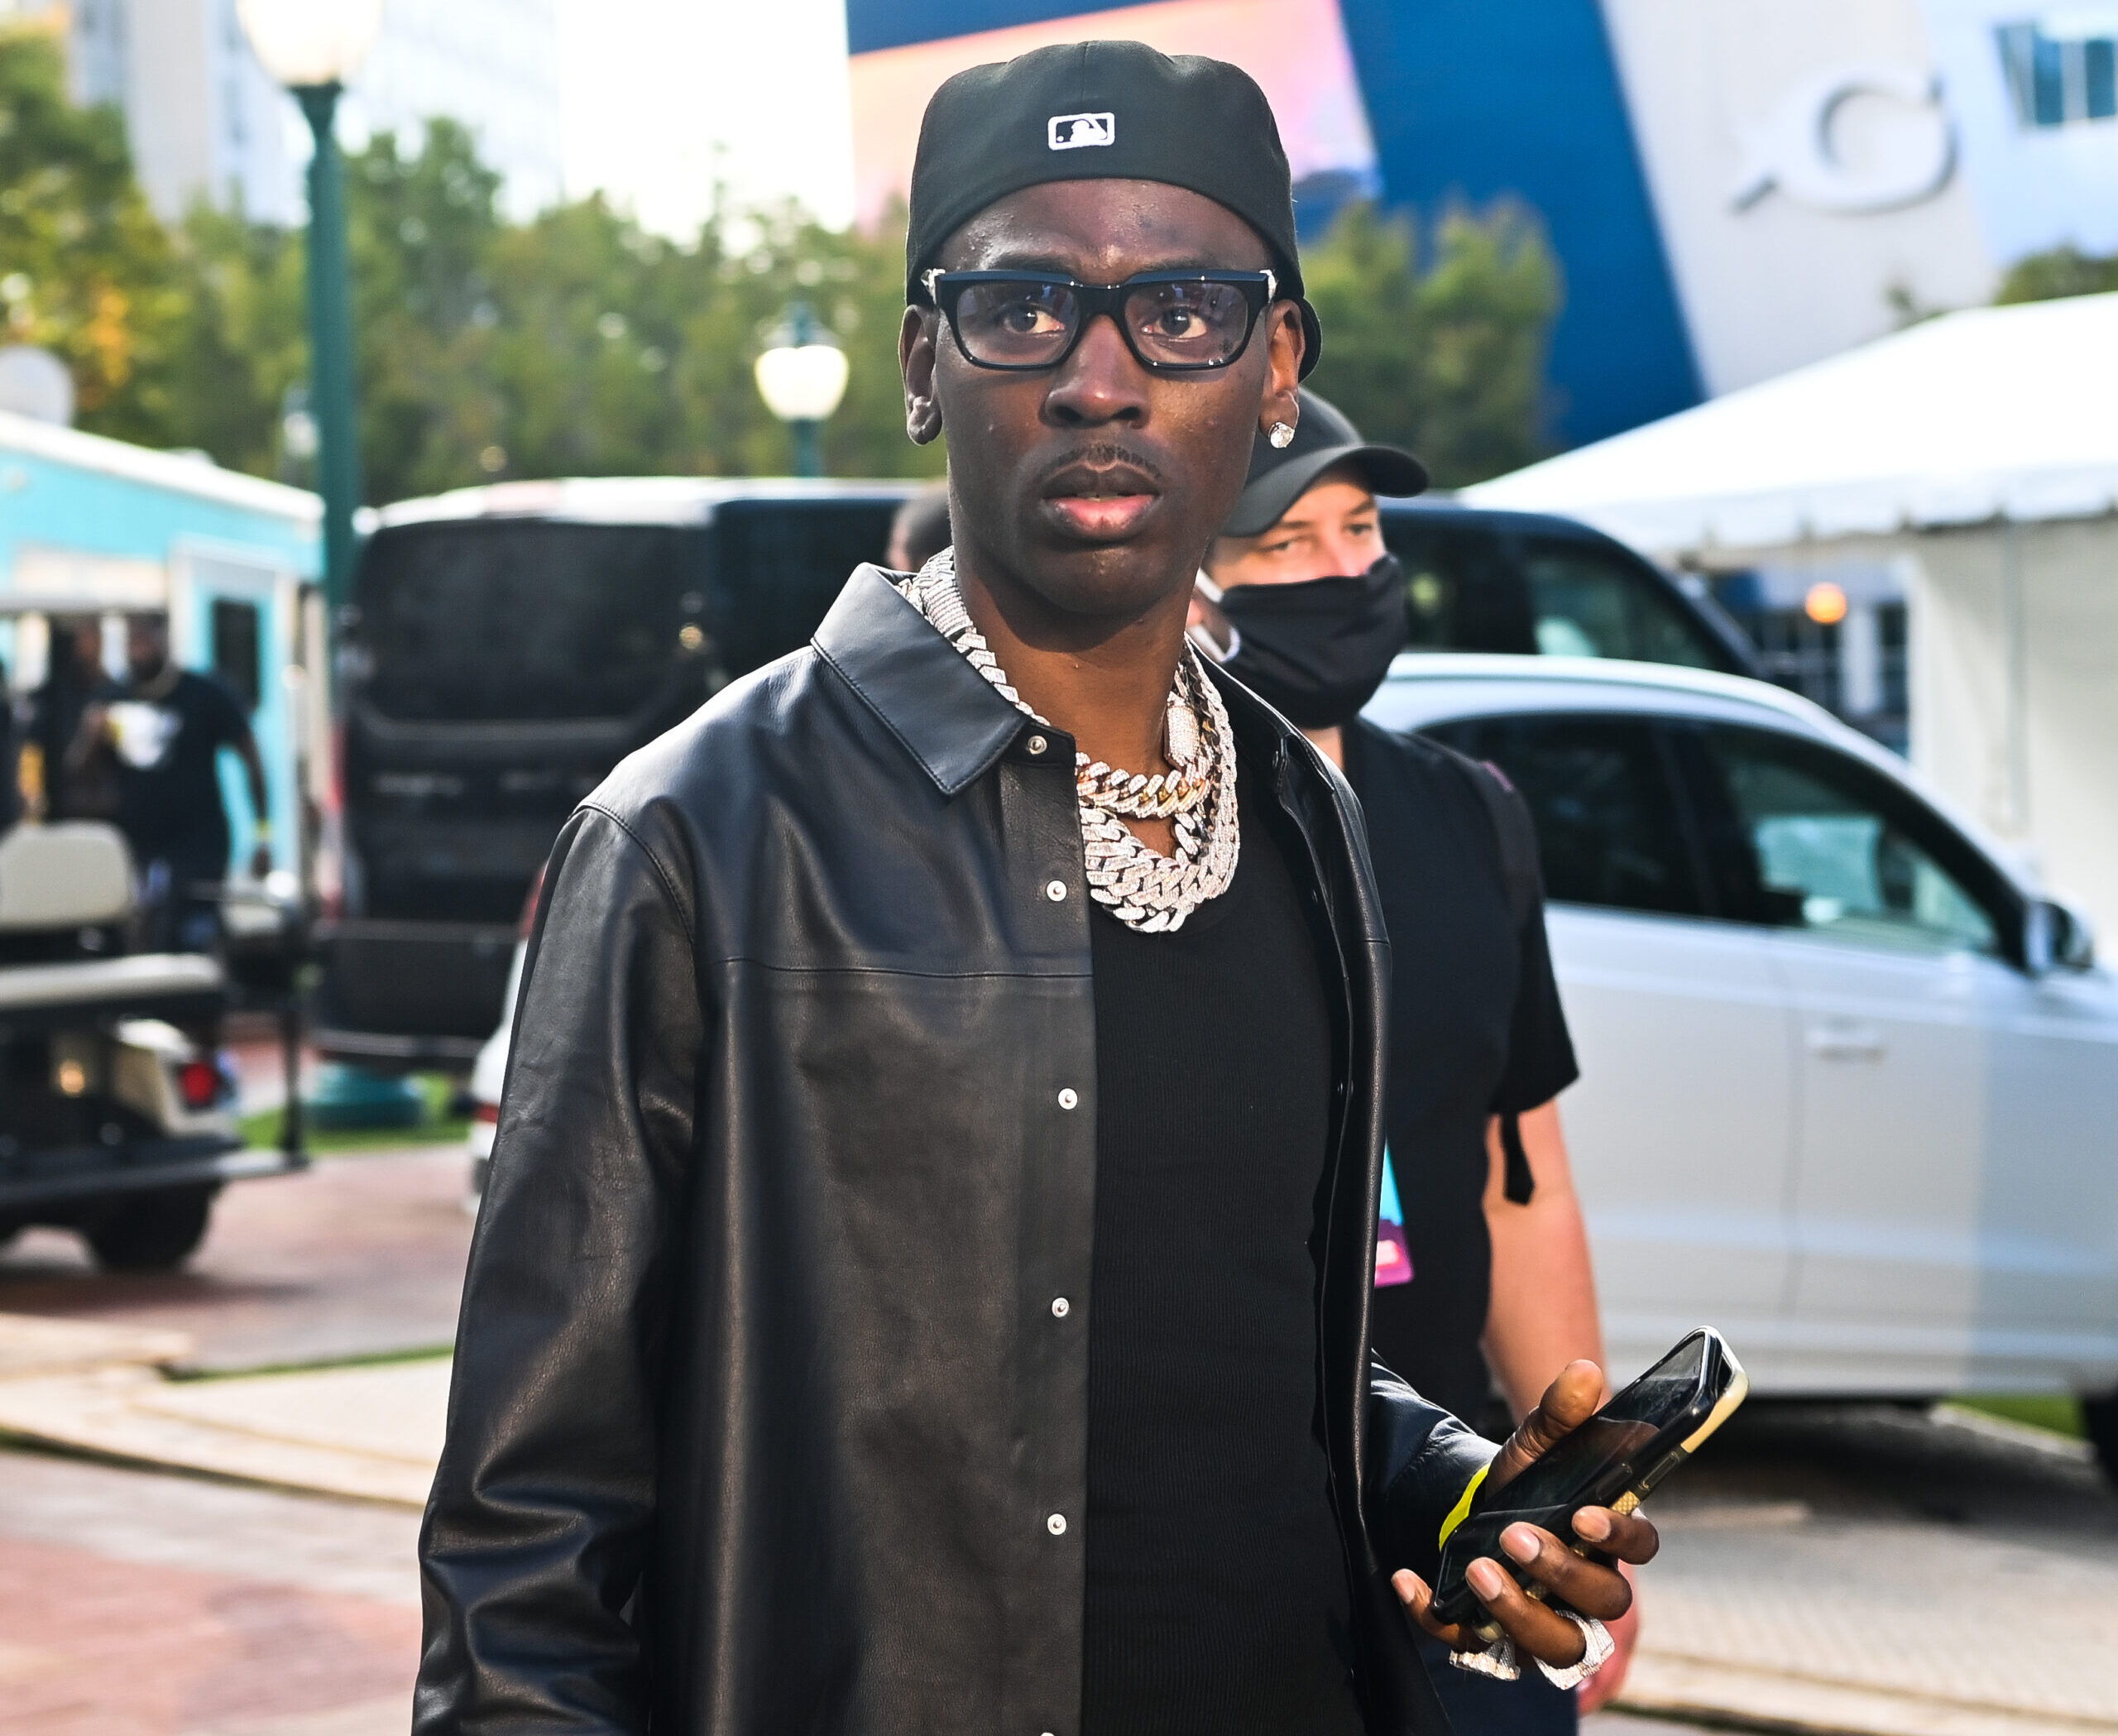 Young Dolph’s Alleged Killer, Jermarcus Johnson, Pleads Guilty To 3 Counts Of Accessory After The Fact